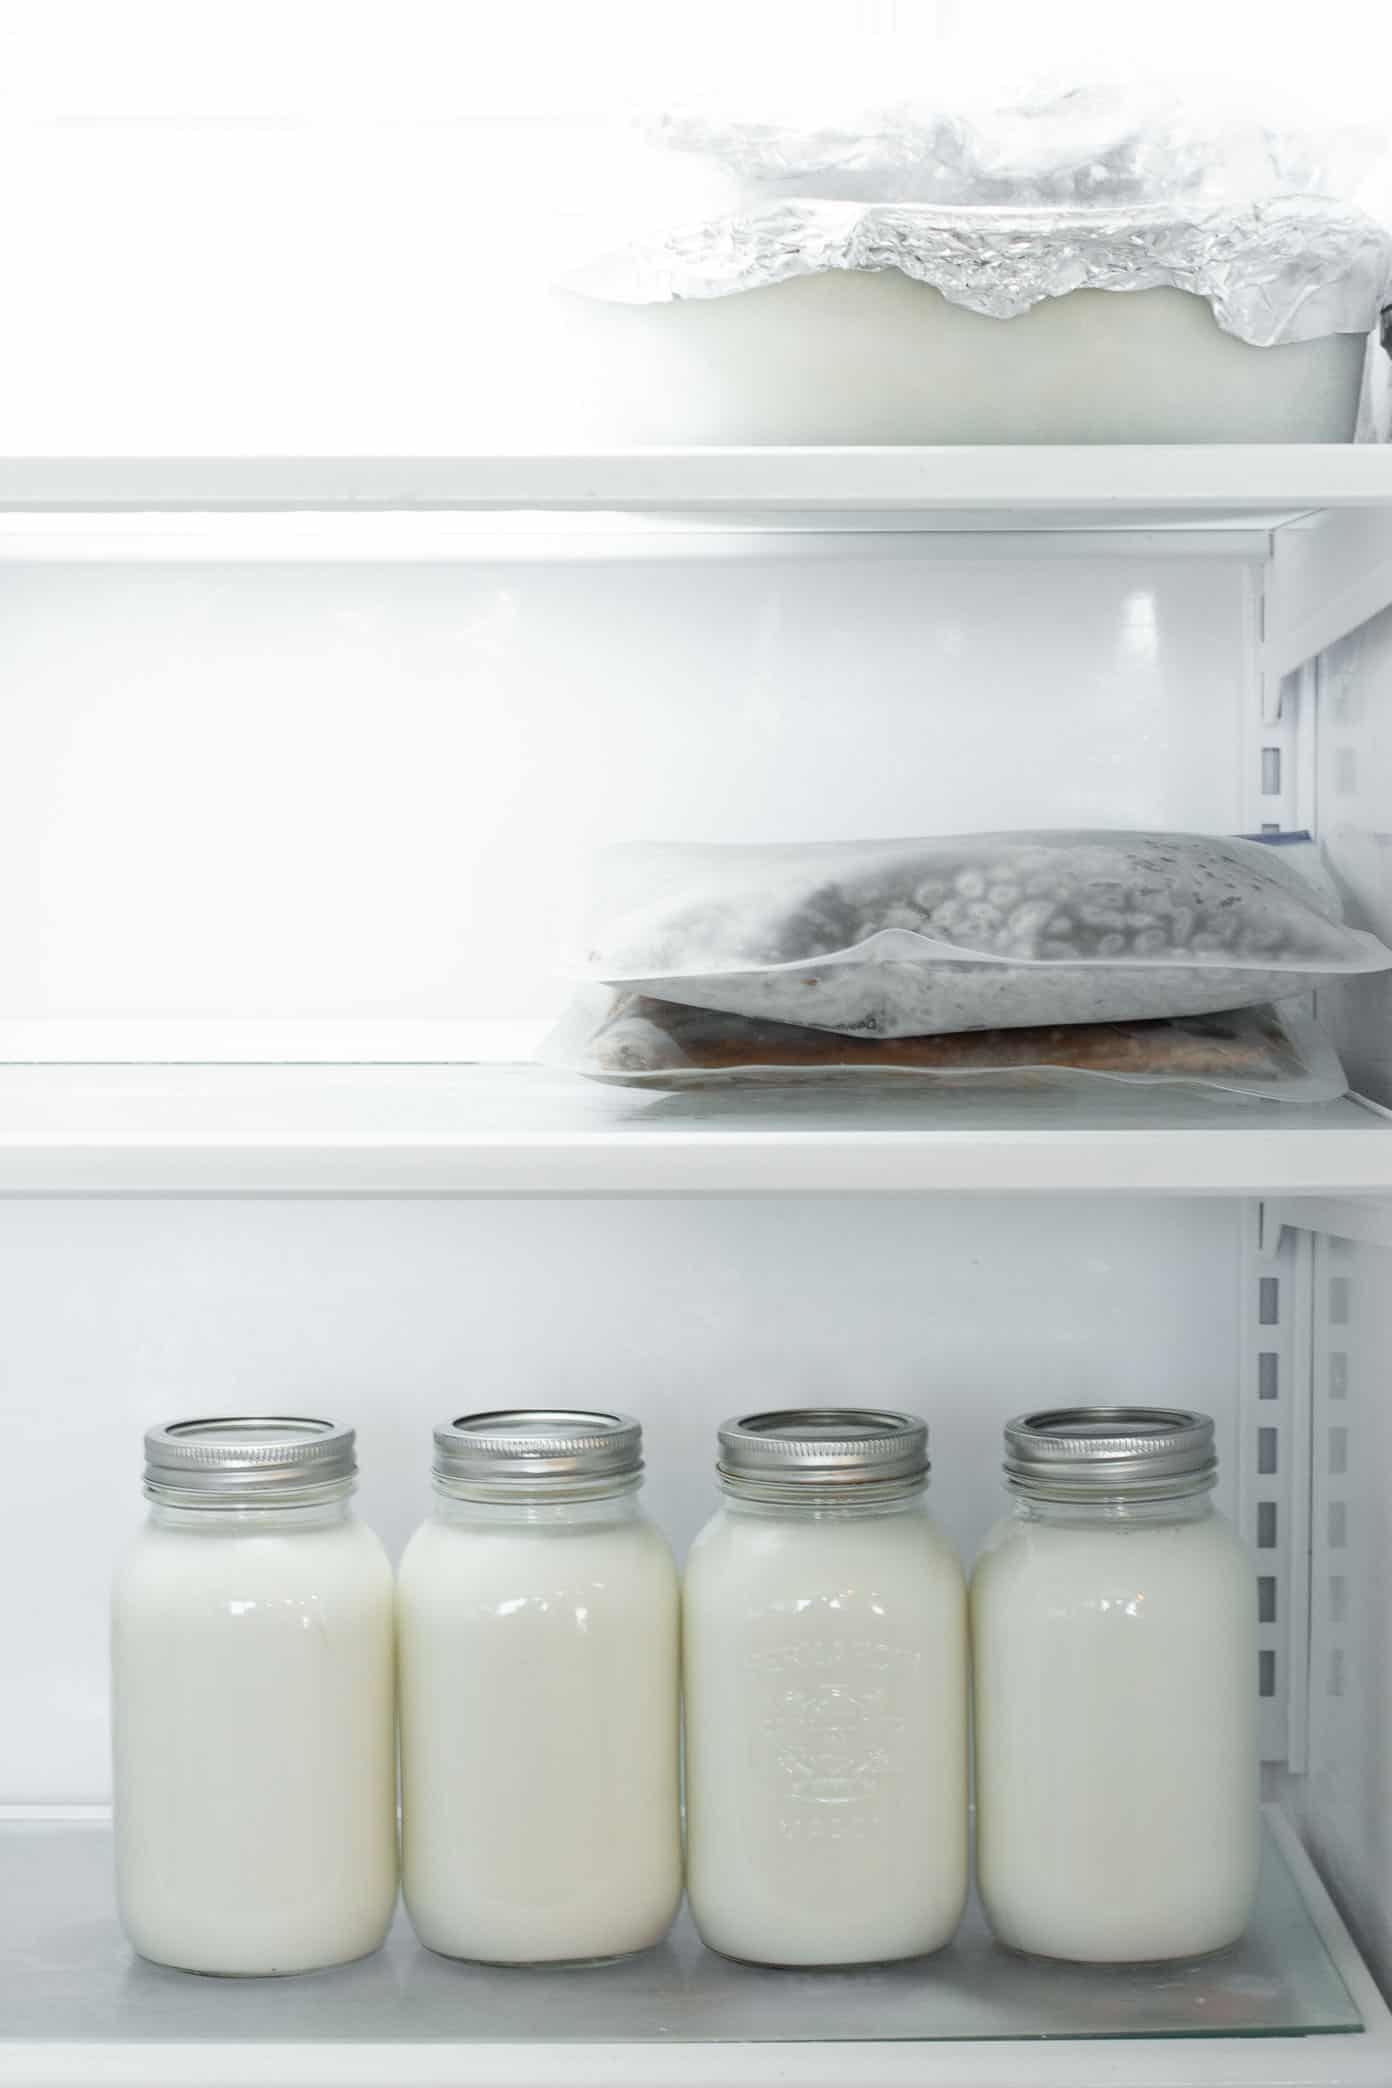 A freezer with three separate shelves. The top shelf has two casserole dishes with foil on them, the middle shelf has two filled resealable bags and the bottom shelf has 4 large mason jars filled with milk.